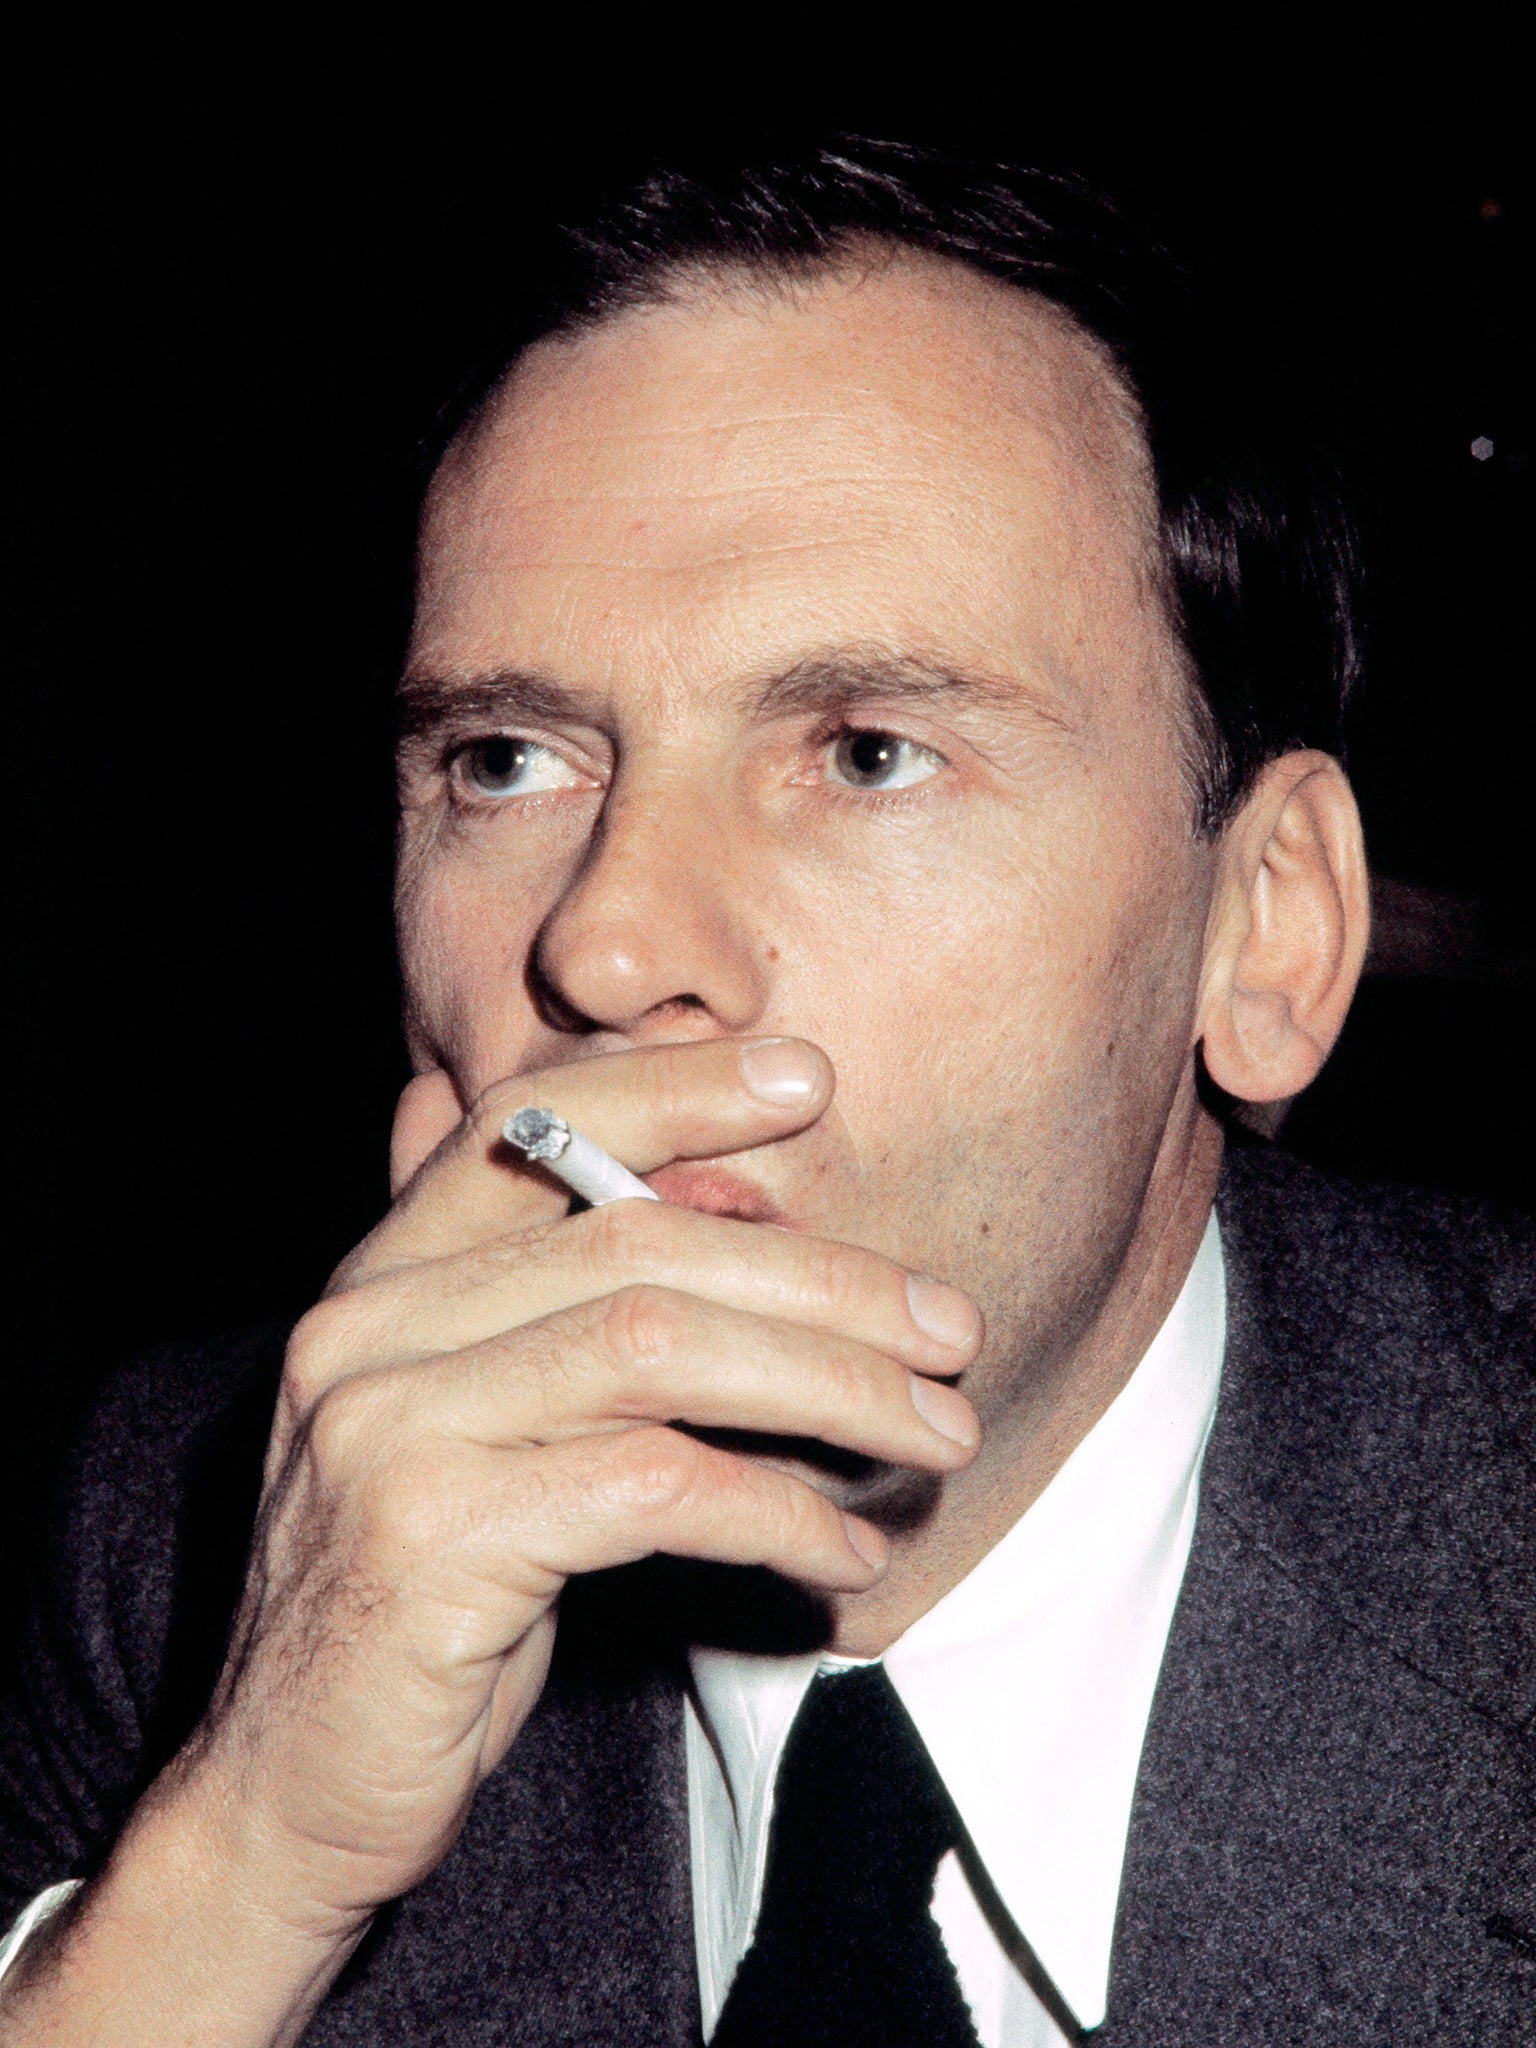 Reluctant star: Trintignant in 1975, shortly before retreating from the spotlight